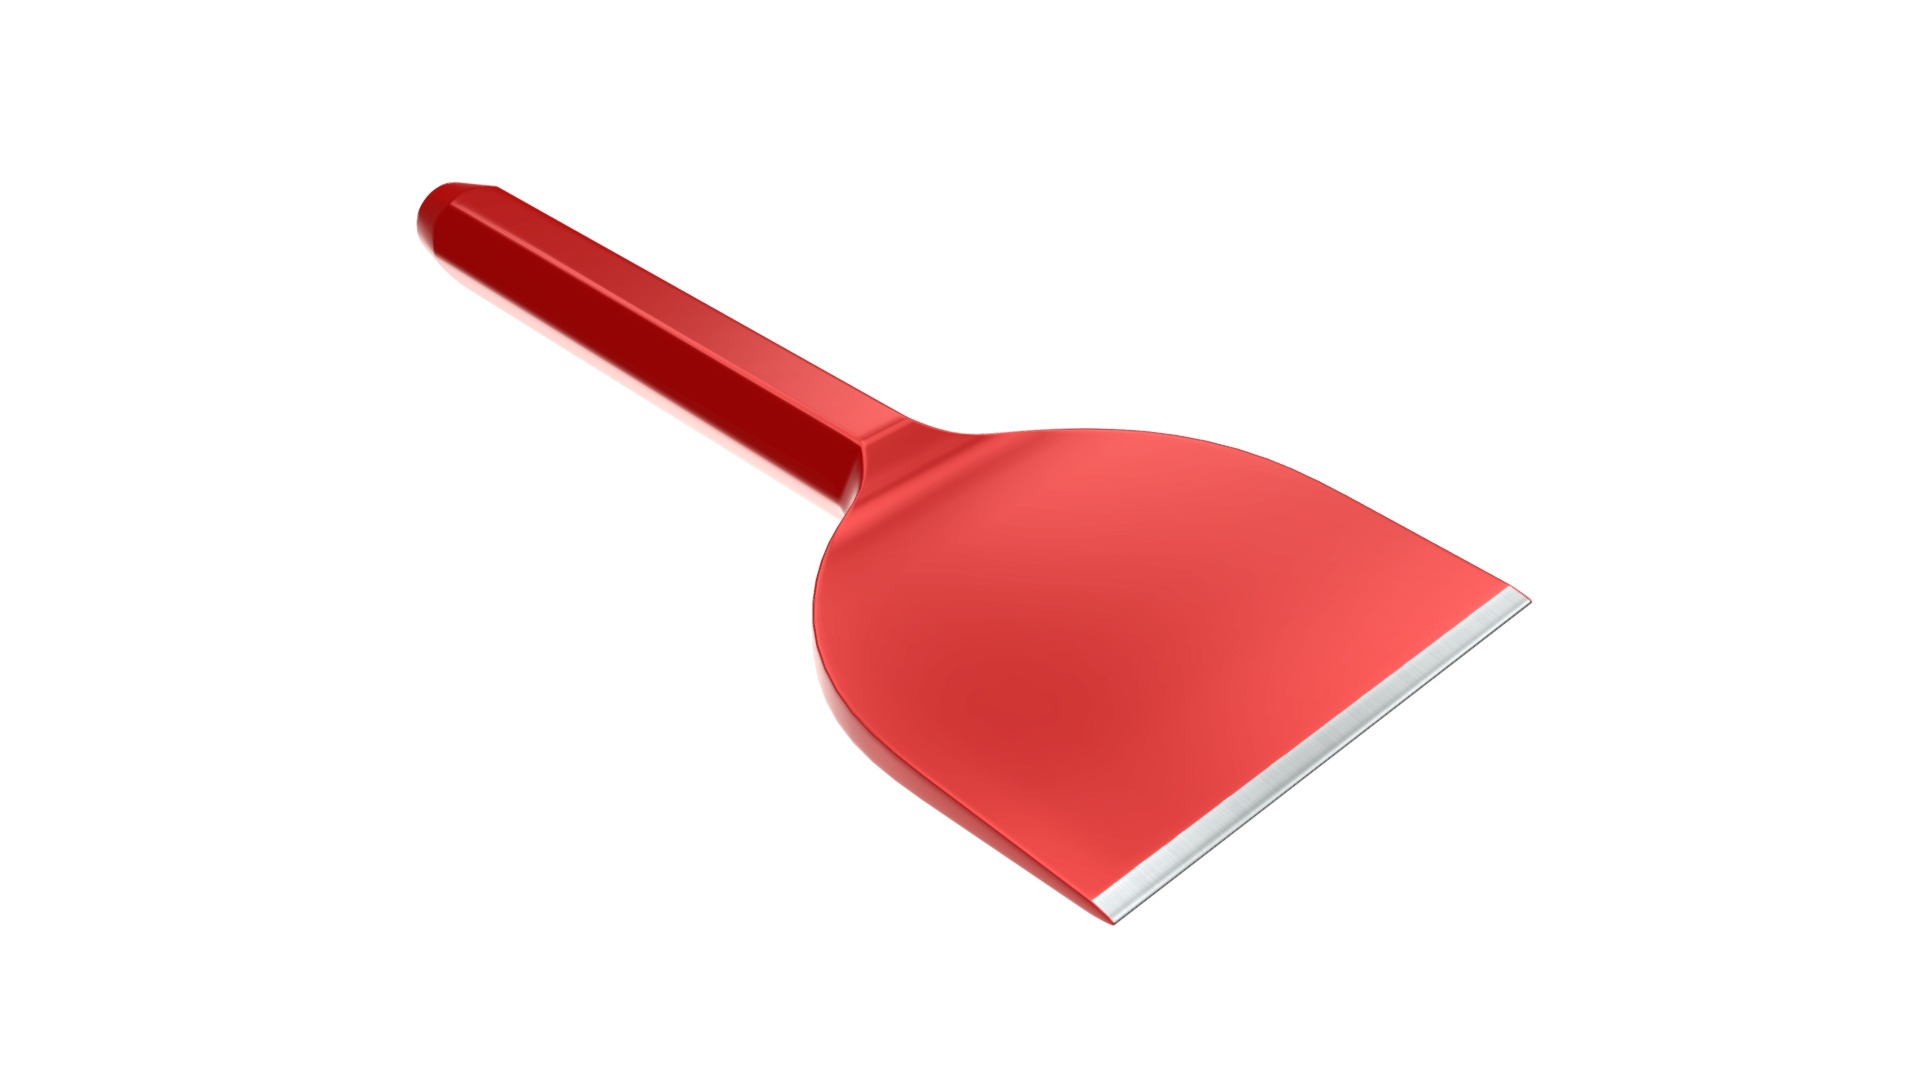 3D model Brick bolster - This is a 3D model of the Brick bolster. The 3D model is about a red plastic knife.